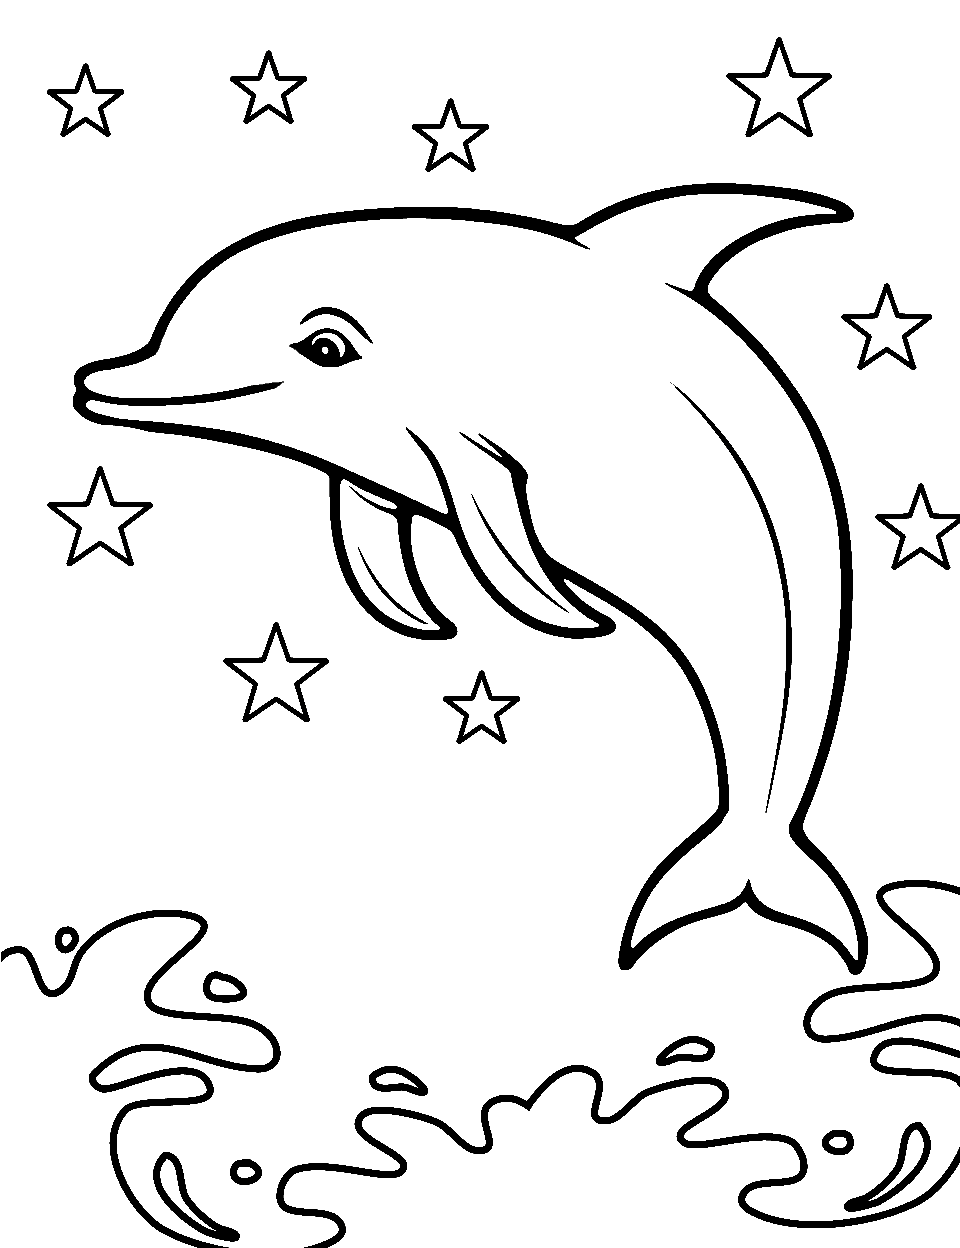 Starlit Dolphin Night Coloring Page - A dolphin leaping under a sky full of stars providing a mystical light.